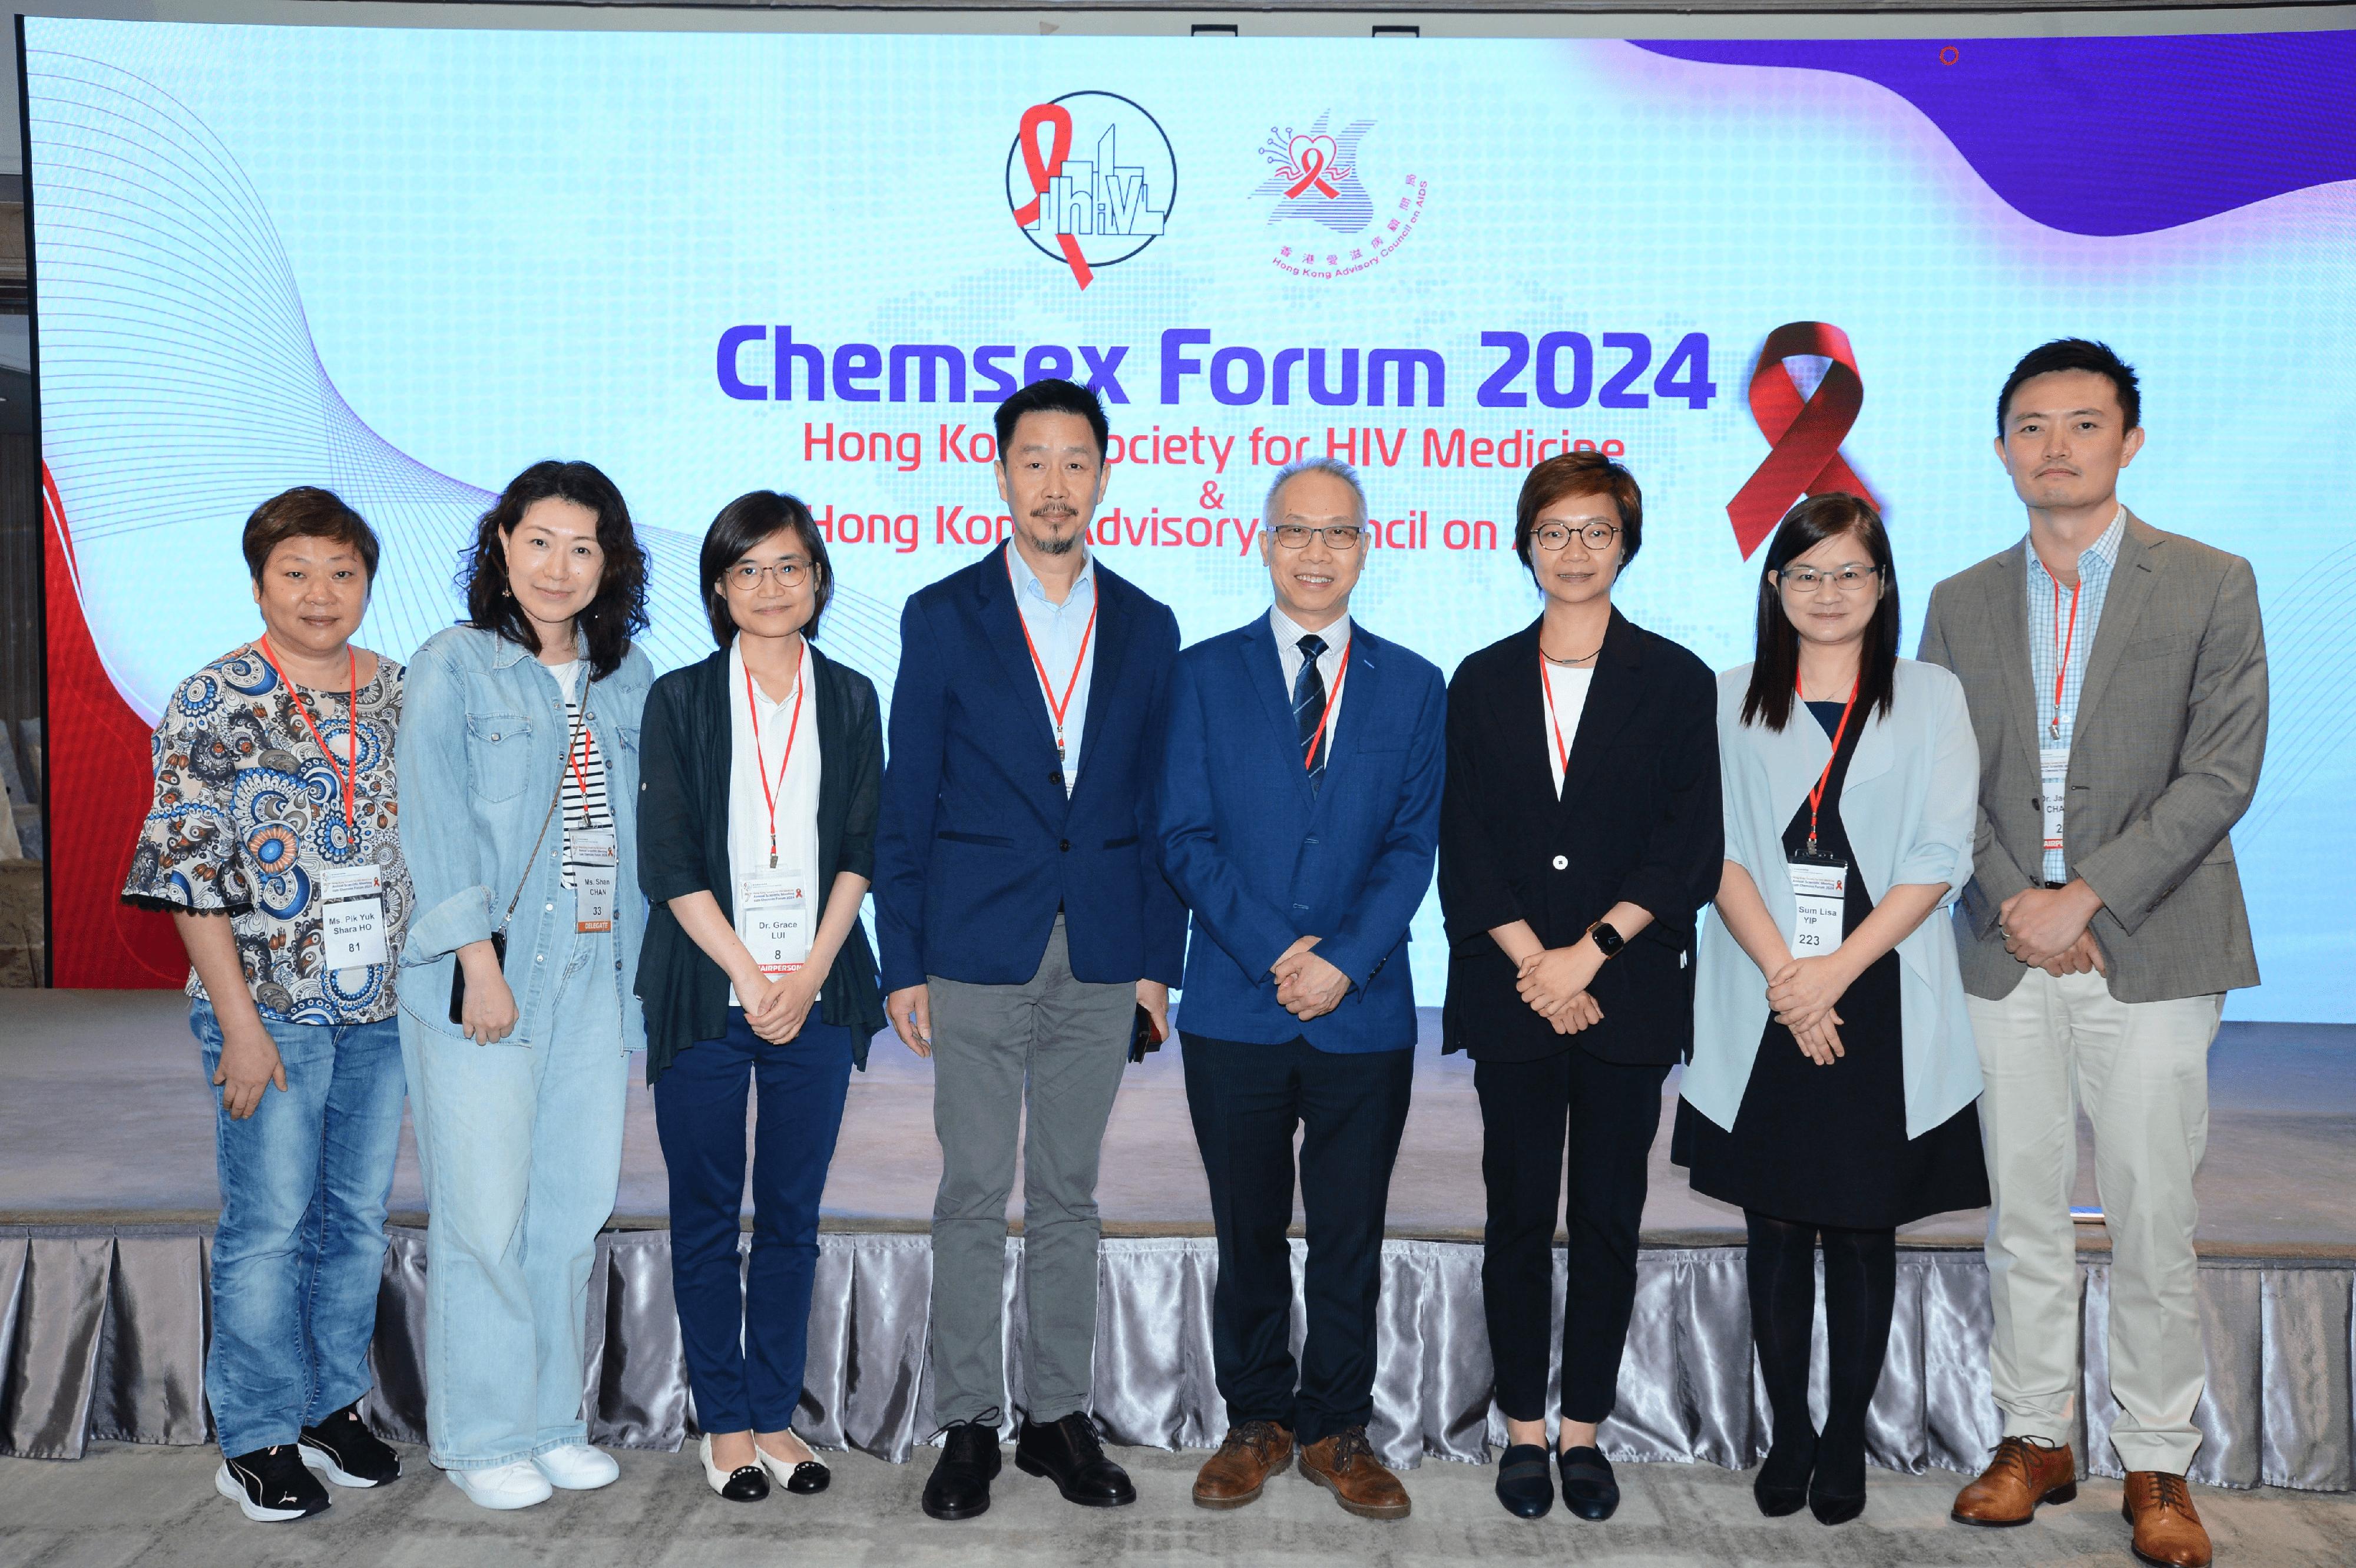 The Hong Kong Advisory Council on AIDS (ACA) and the Hong Kong Society for HIV Medicine jointly organised an interdisciplinary forum on chemsex (the Chemsex Forum) today (May 11), during which experts and representatives from the healthcare, welfare and academic sectors convened to discuss the international public health concern about chemsex from diverse perspectives in an effort to further explore how to pool their resources and expertise to provide more appropriate services for people concerned. Photo shows the Chairman of the ACA, Dr Ho King-man (fourth right); Consultant (Special Preventive Programme) of the Centre for Health Protection of the Department of Health, Dr Bonnie Wong (third right), and other participants.